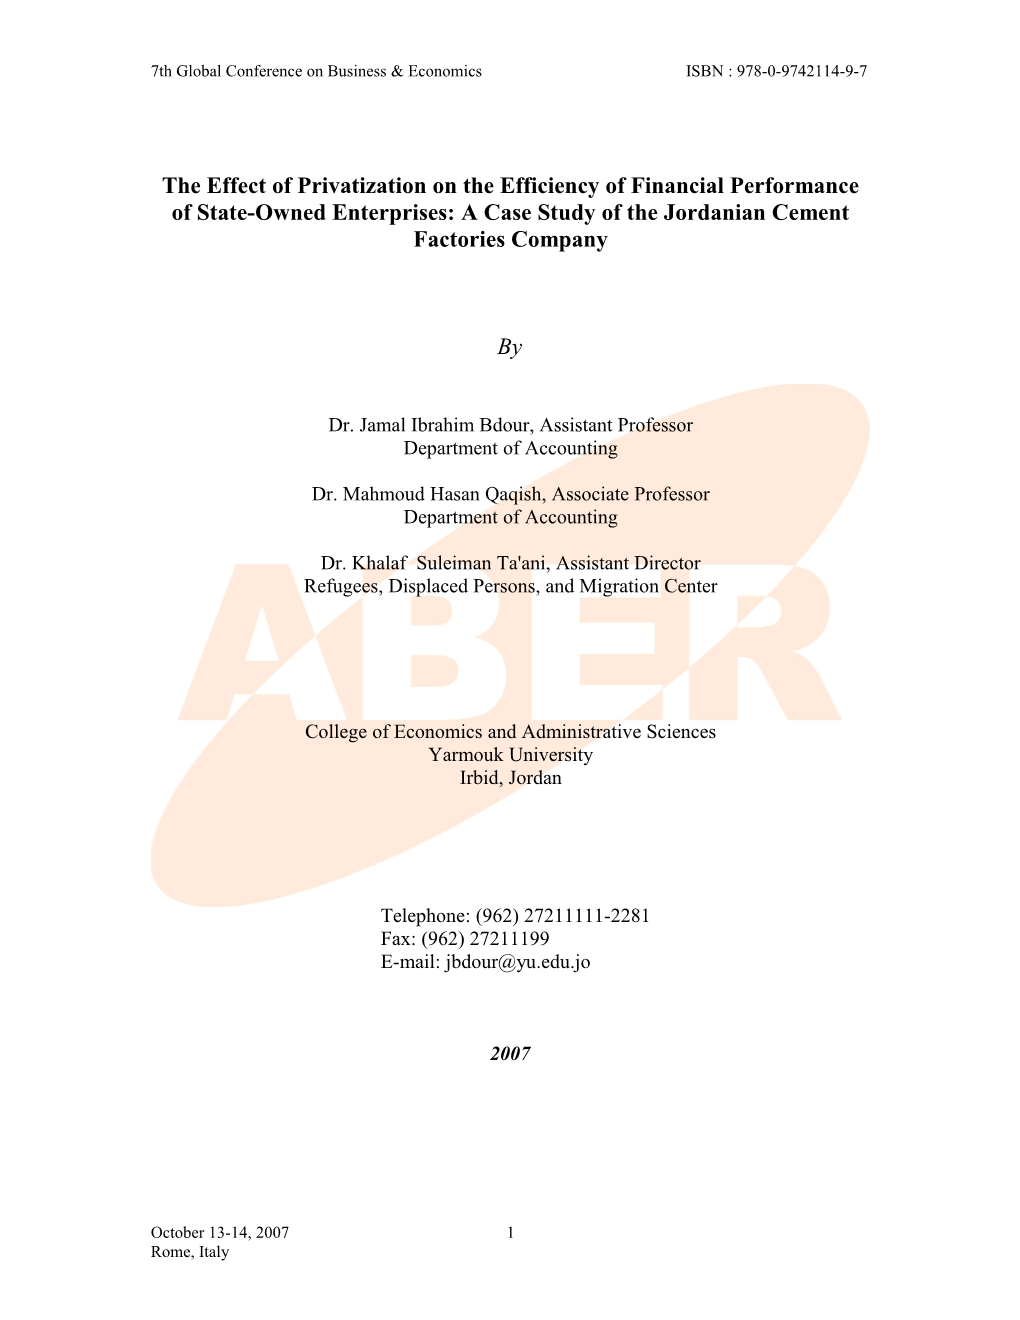 The Effect of Privatization on the Efficiency of Financial Performance of State-Owned